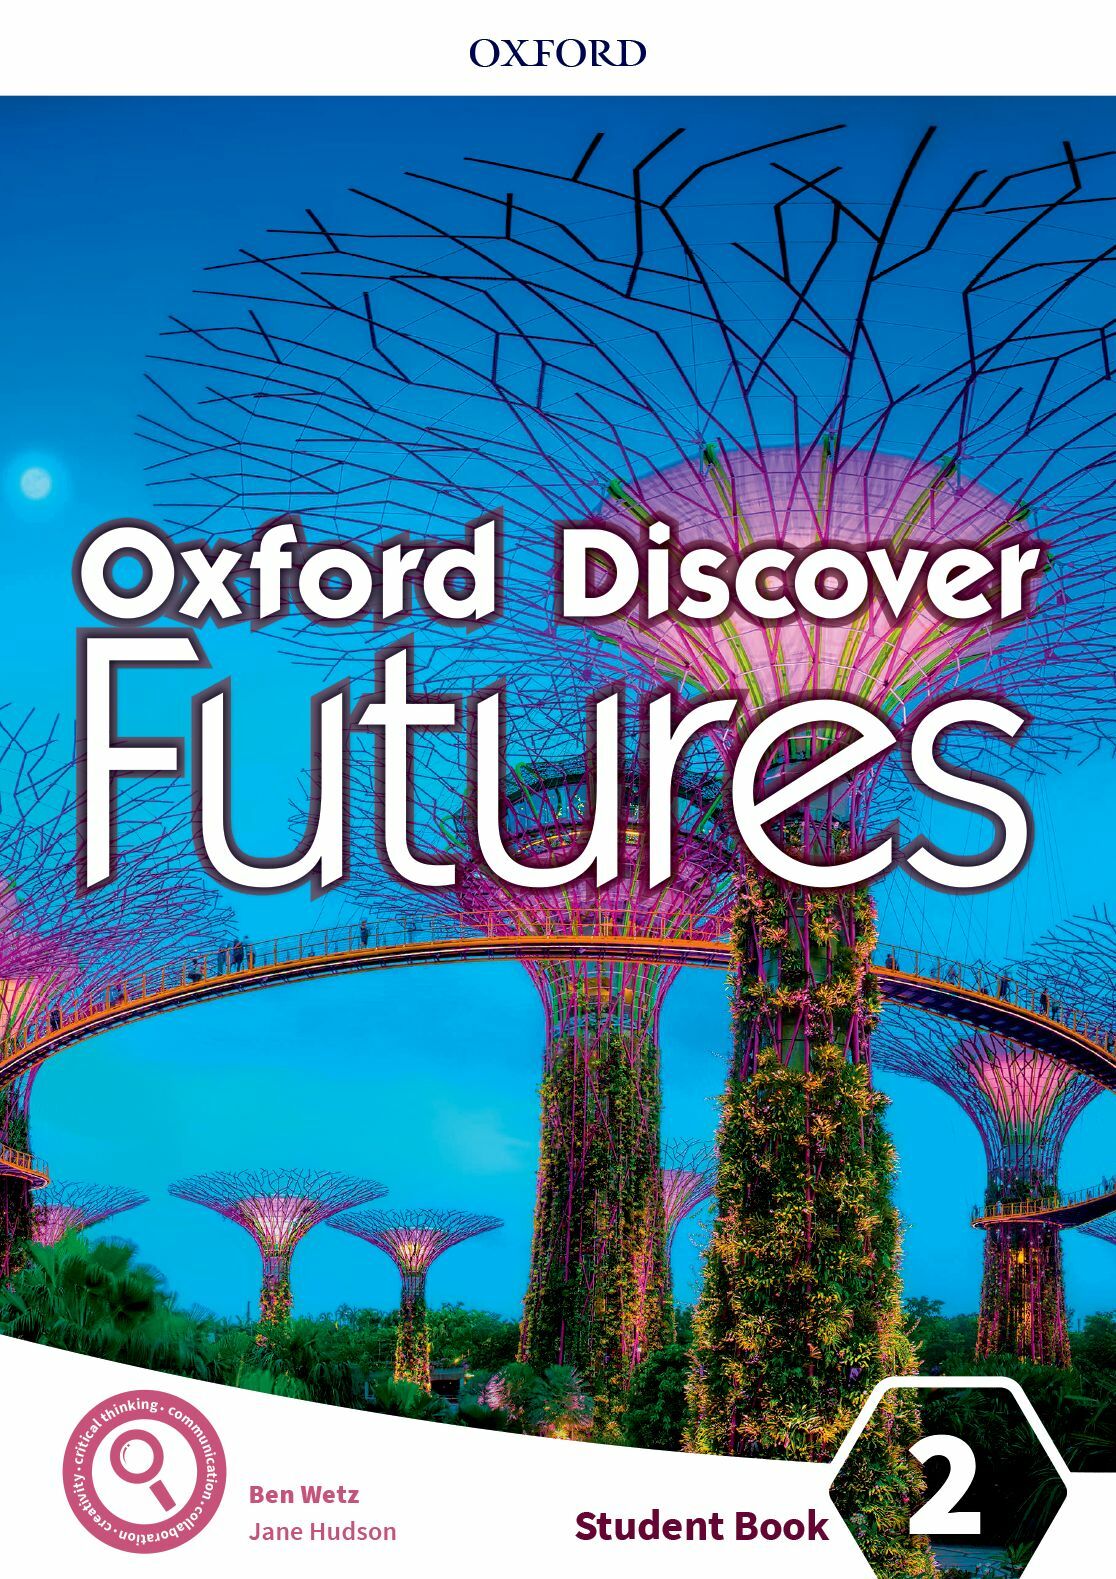 Oxford Discover Futures Level 2: Student Book (Paperback)